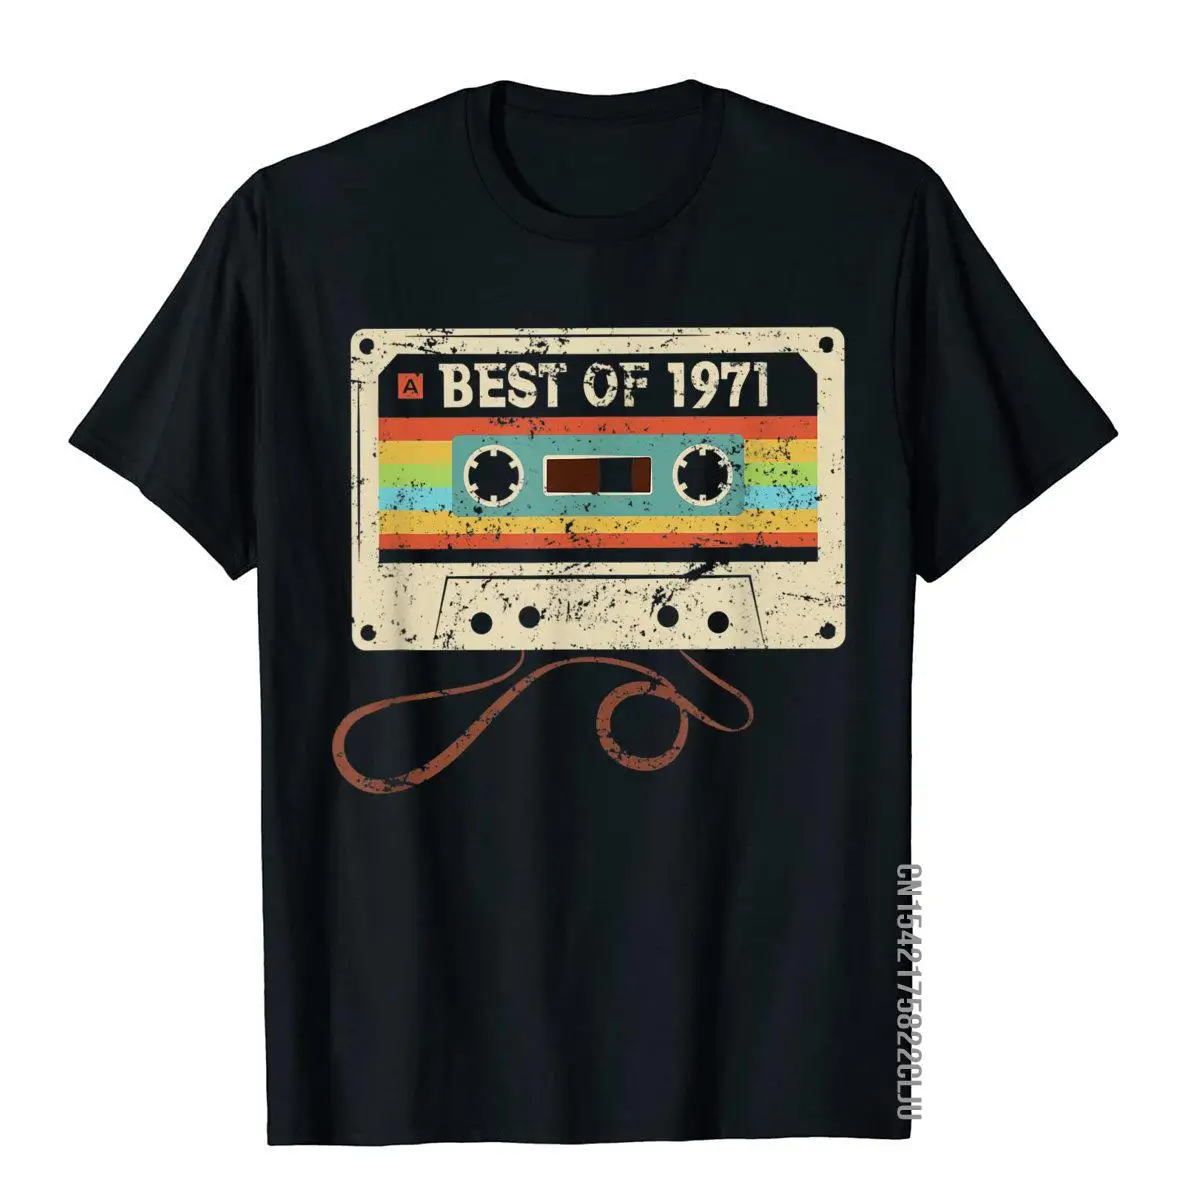 

Best Of 1971 Cool Vintage 50th Birthday Gift For Men Women T-Shirt Mens New Design Gift Tops Shirt Cotton T Shirts Outdoor